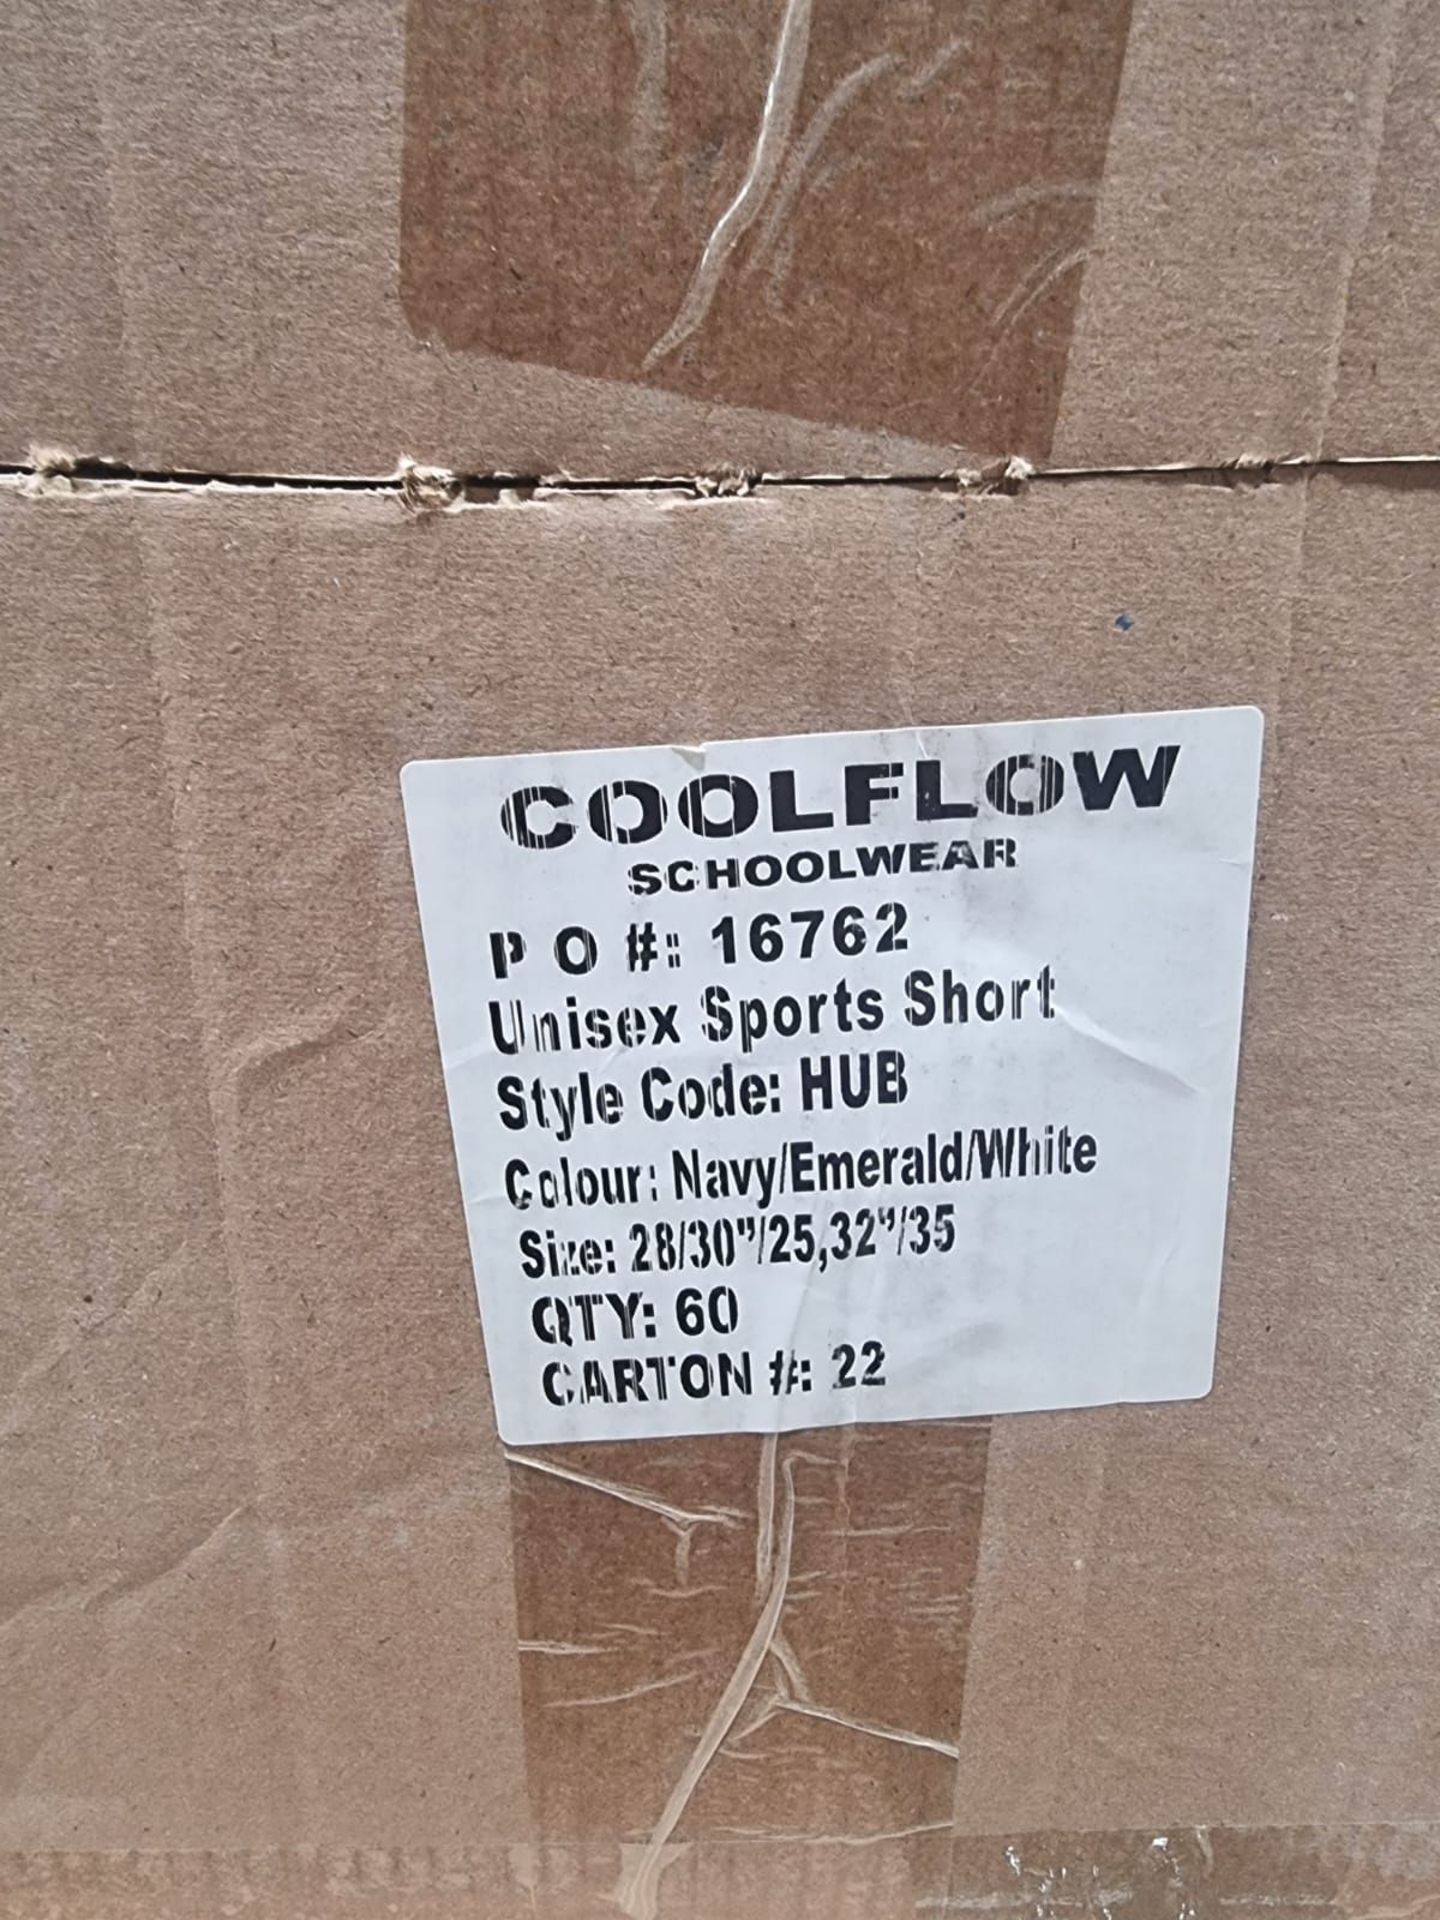 PALLET TO CONTAIN A LARGE QUANTITY OF NEW CLOTHING GOODS. MAY INCLUDE ITEMS SUCH AS: T-SHIRTS, - Image 14 of 28